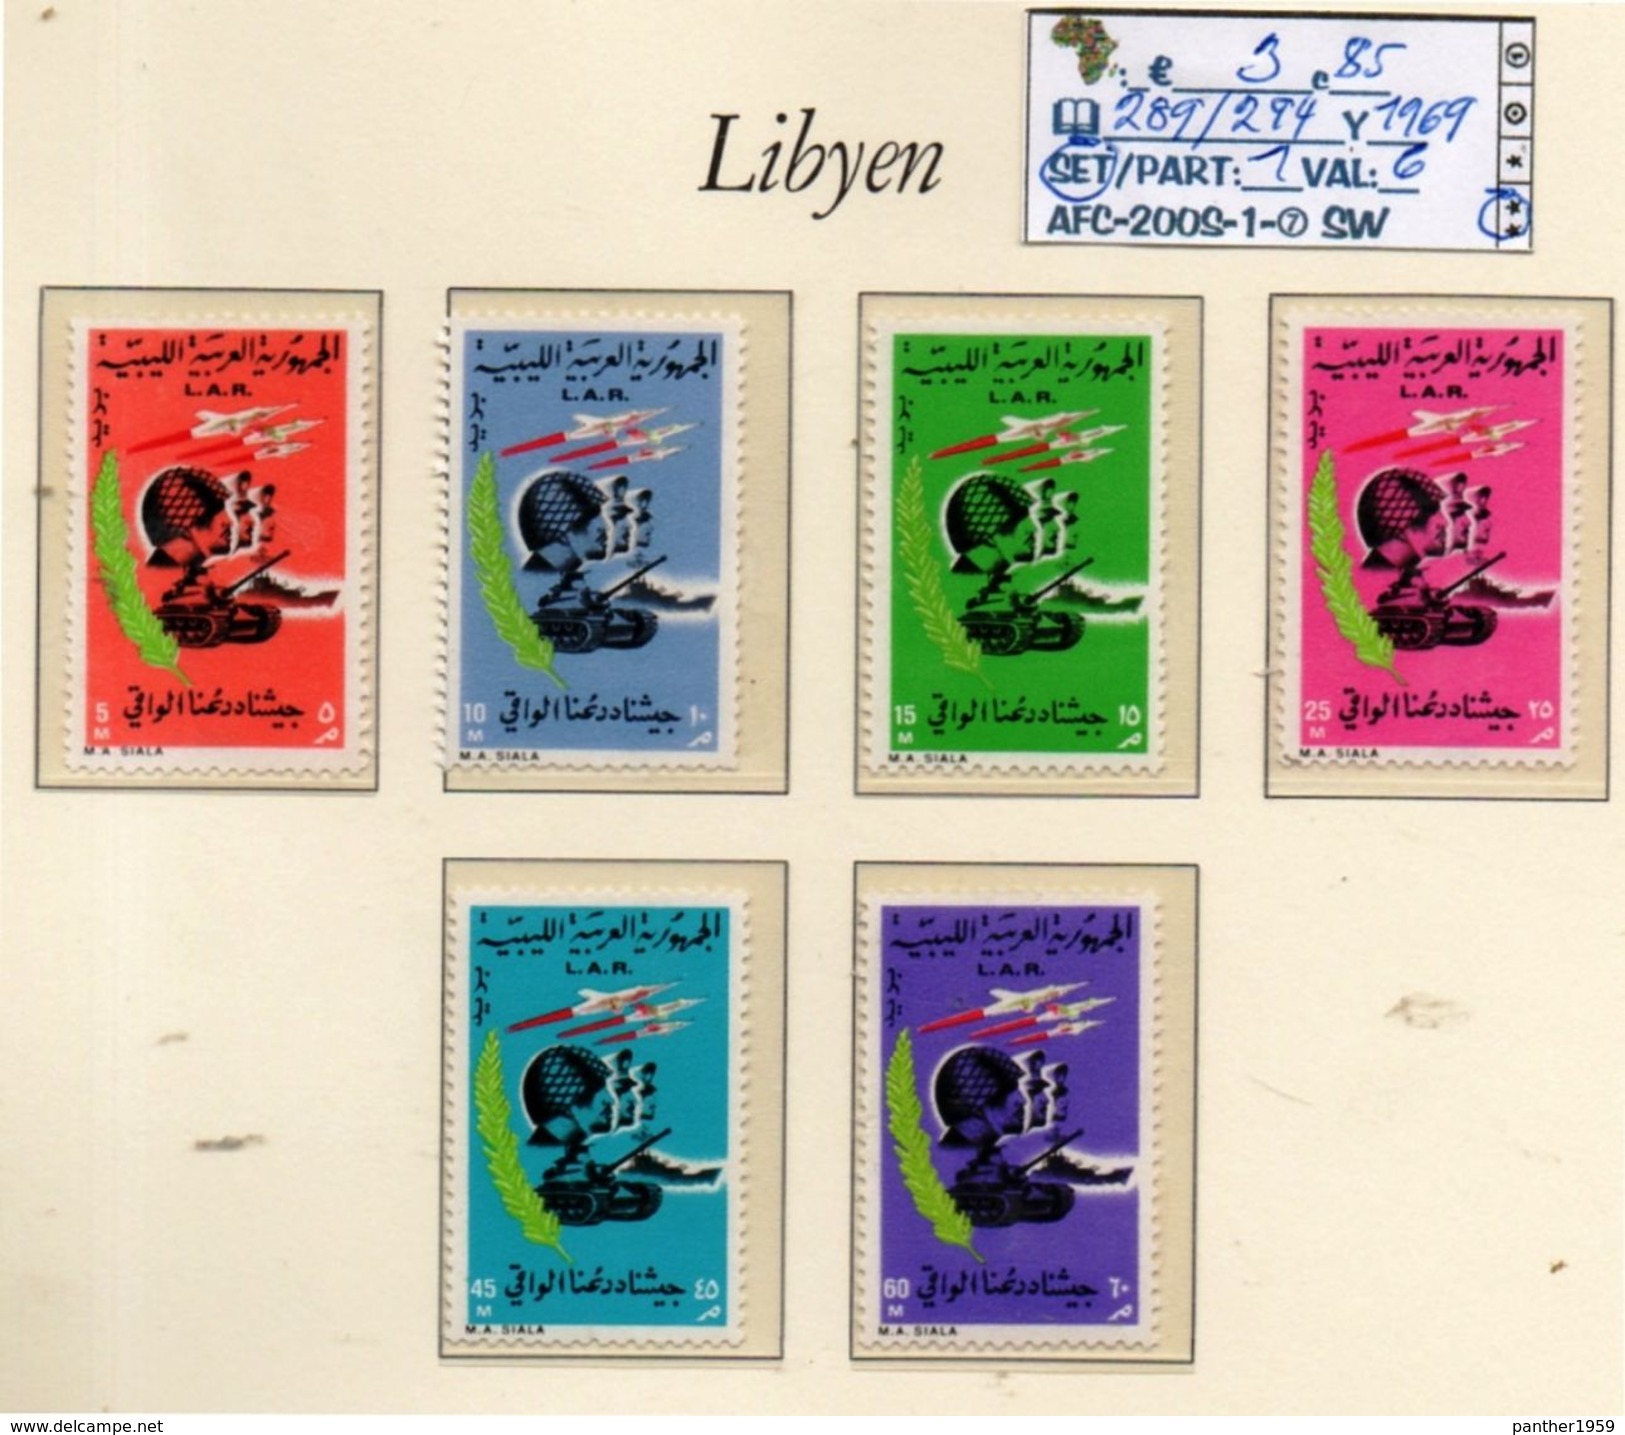 AFRICA:#LIBYA#L.A.R.#TOPICS#SOLDIERS#ARMY#SET#MNH** (AFC-200S) (07) - Libye